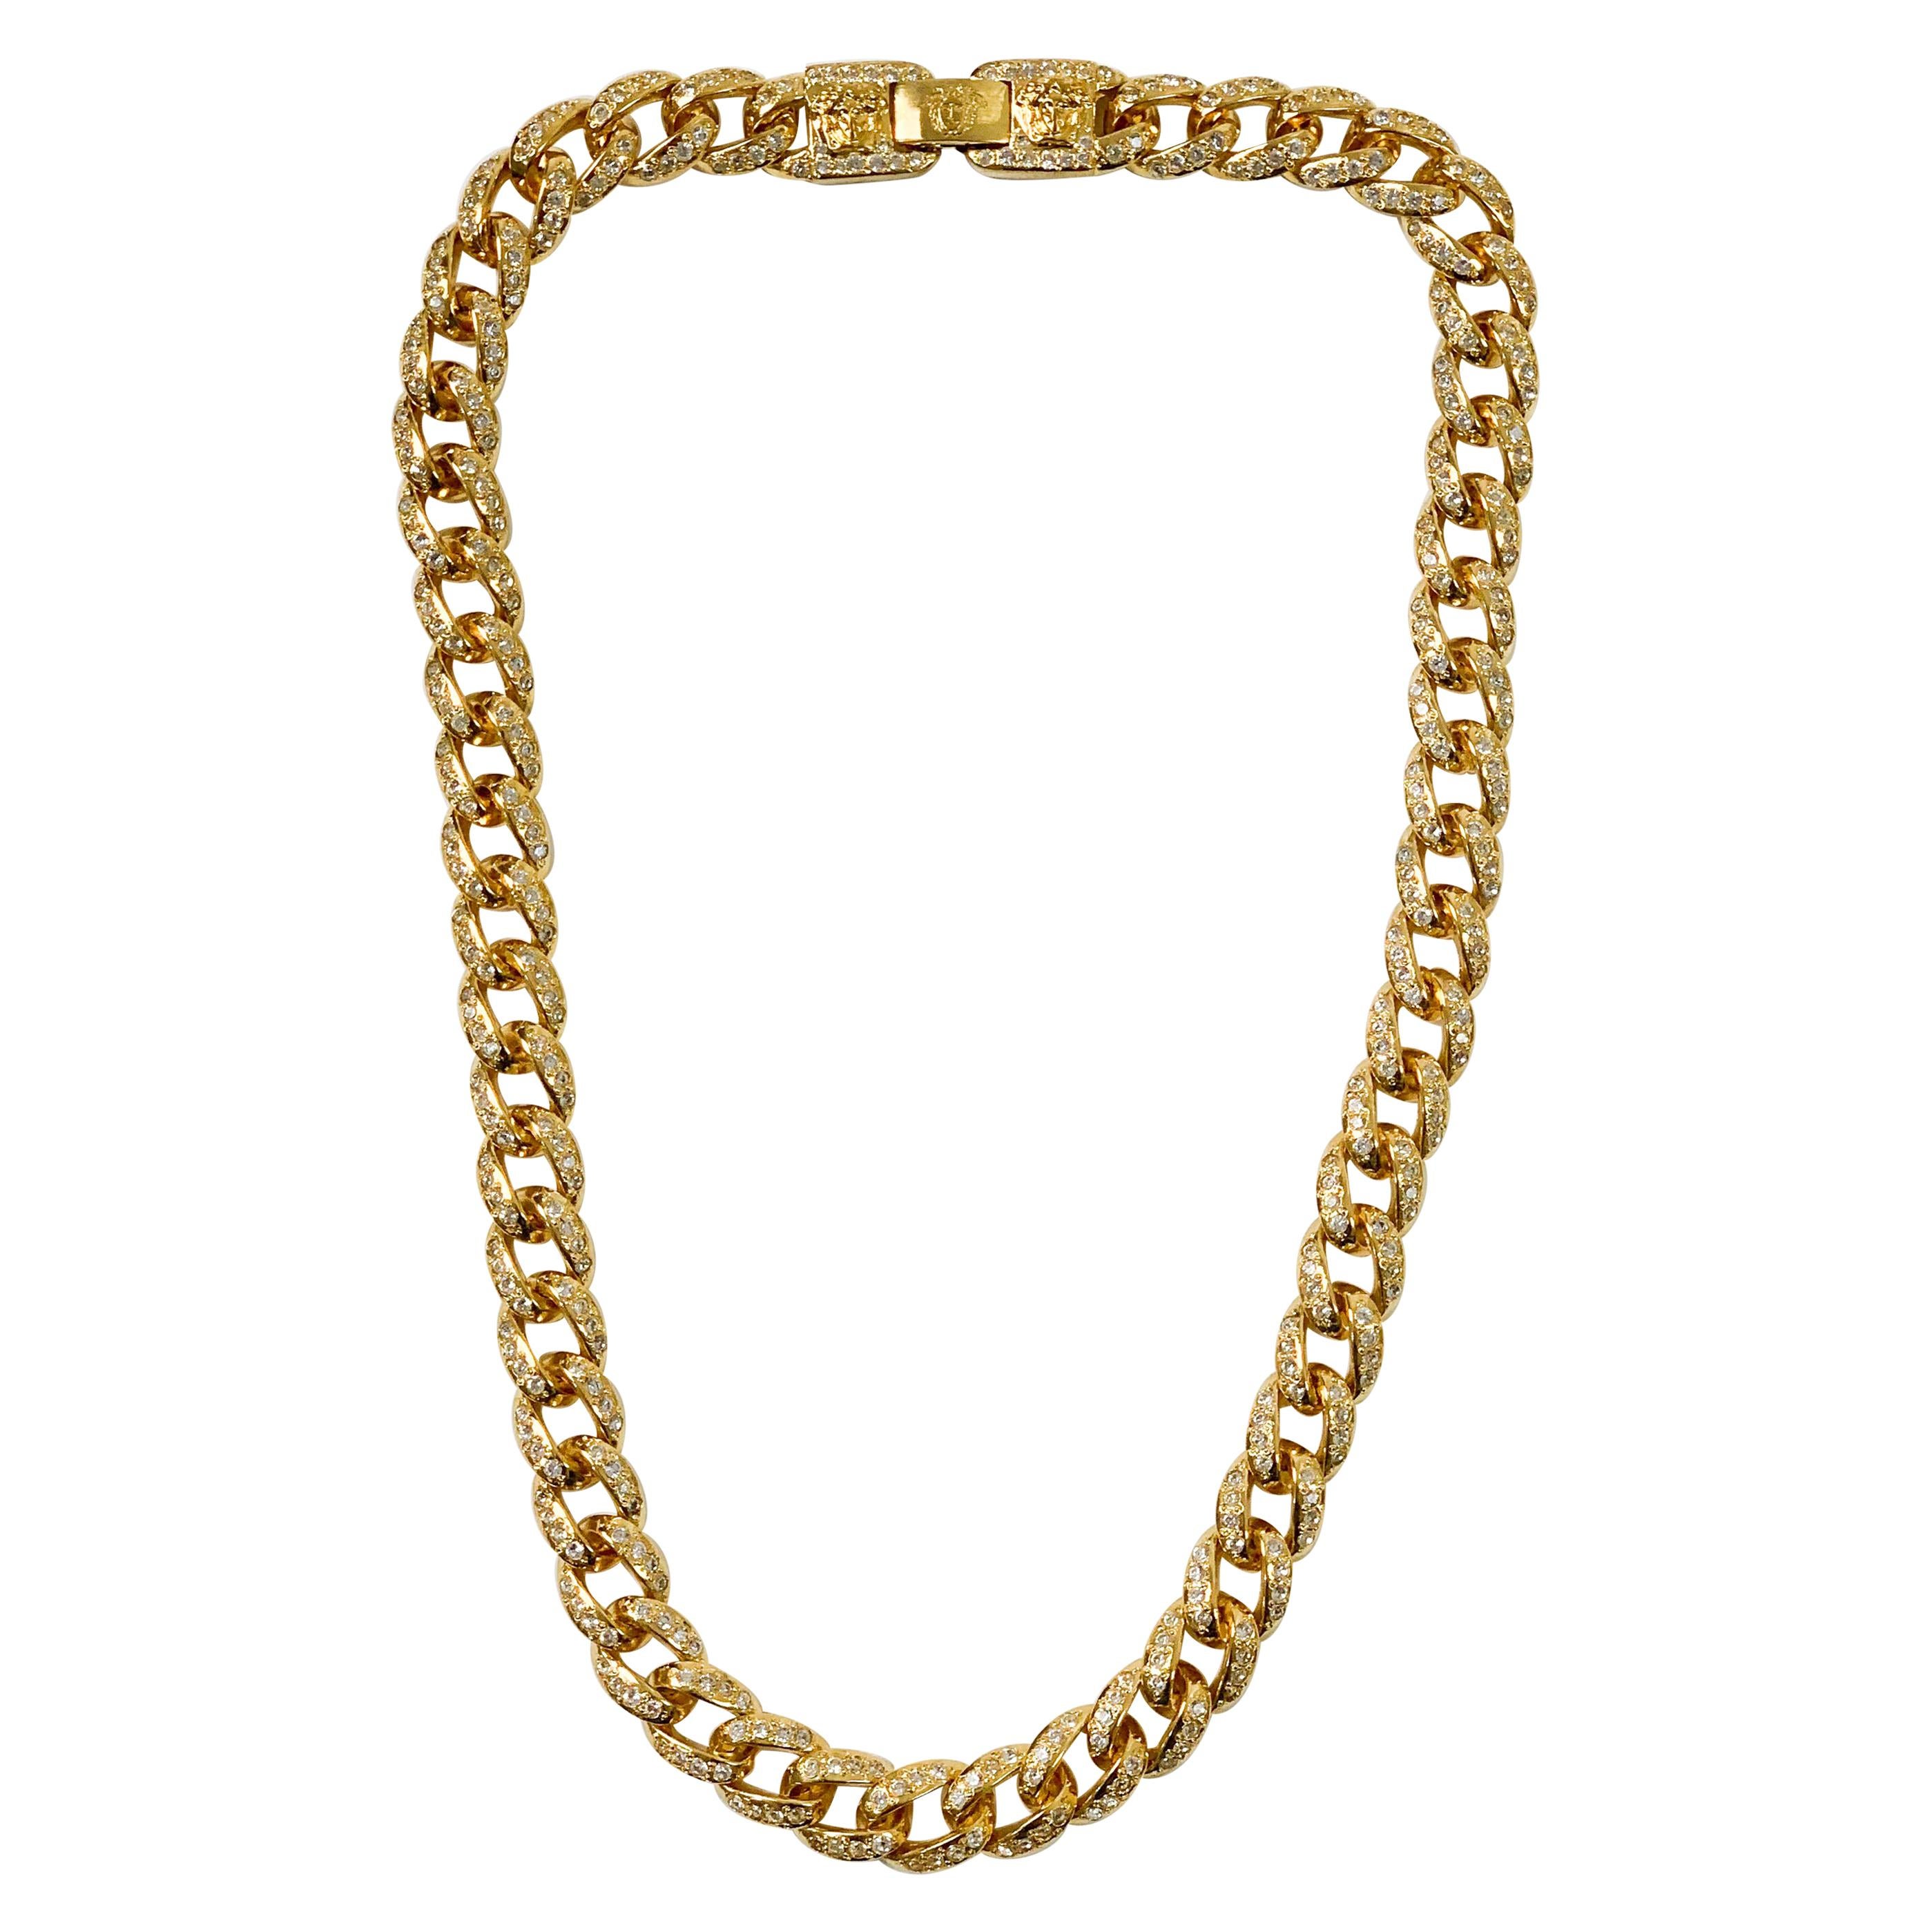 Gianni Versace 1990’s gold curb chain necklace 